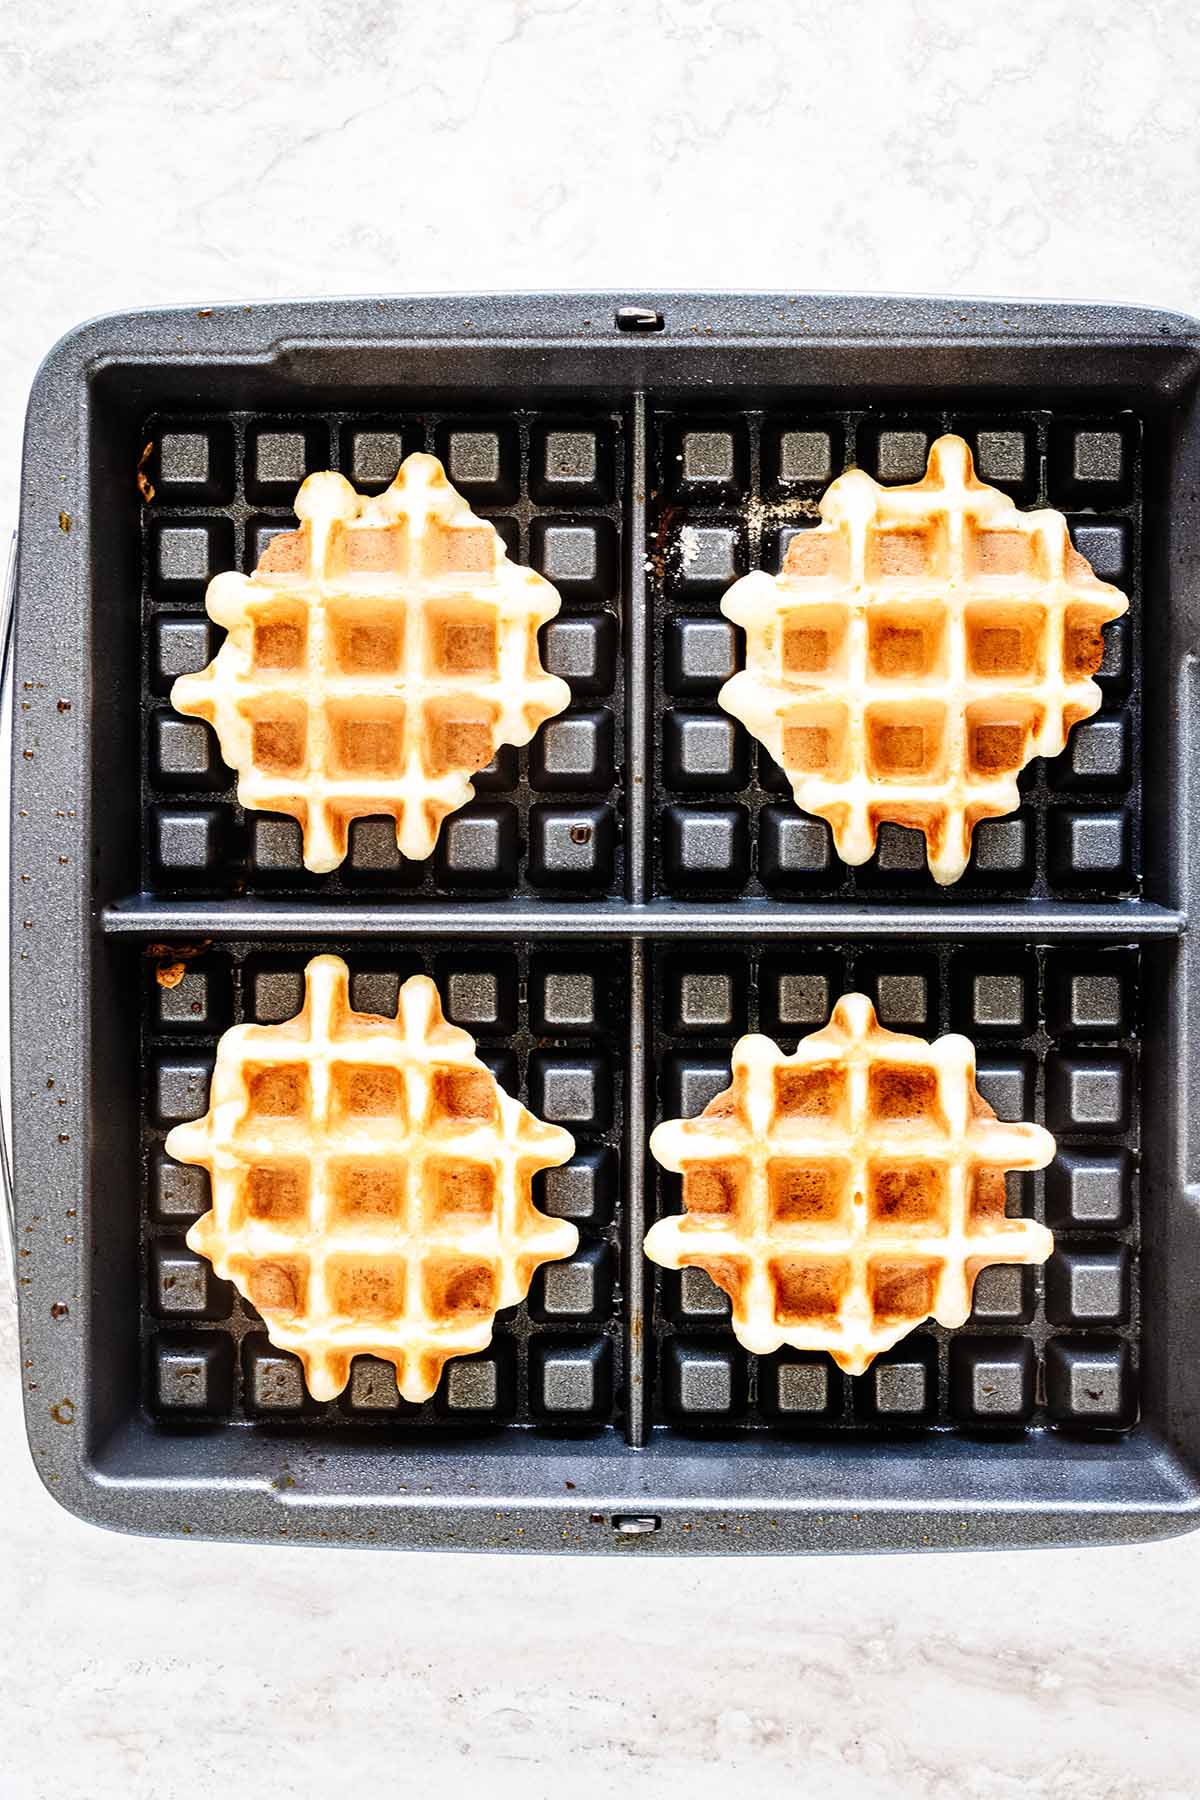 Overhead view of waffles cooking on a waffle iron